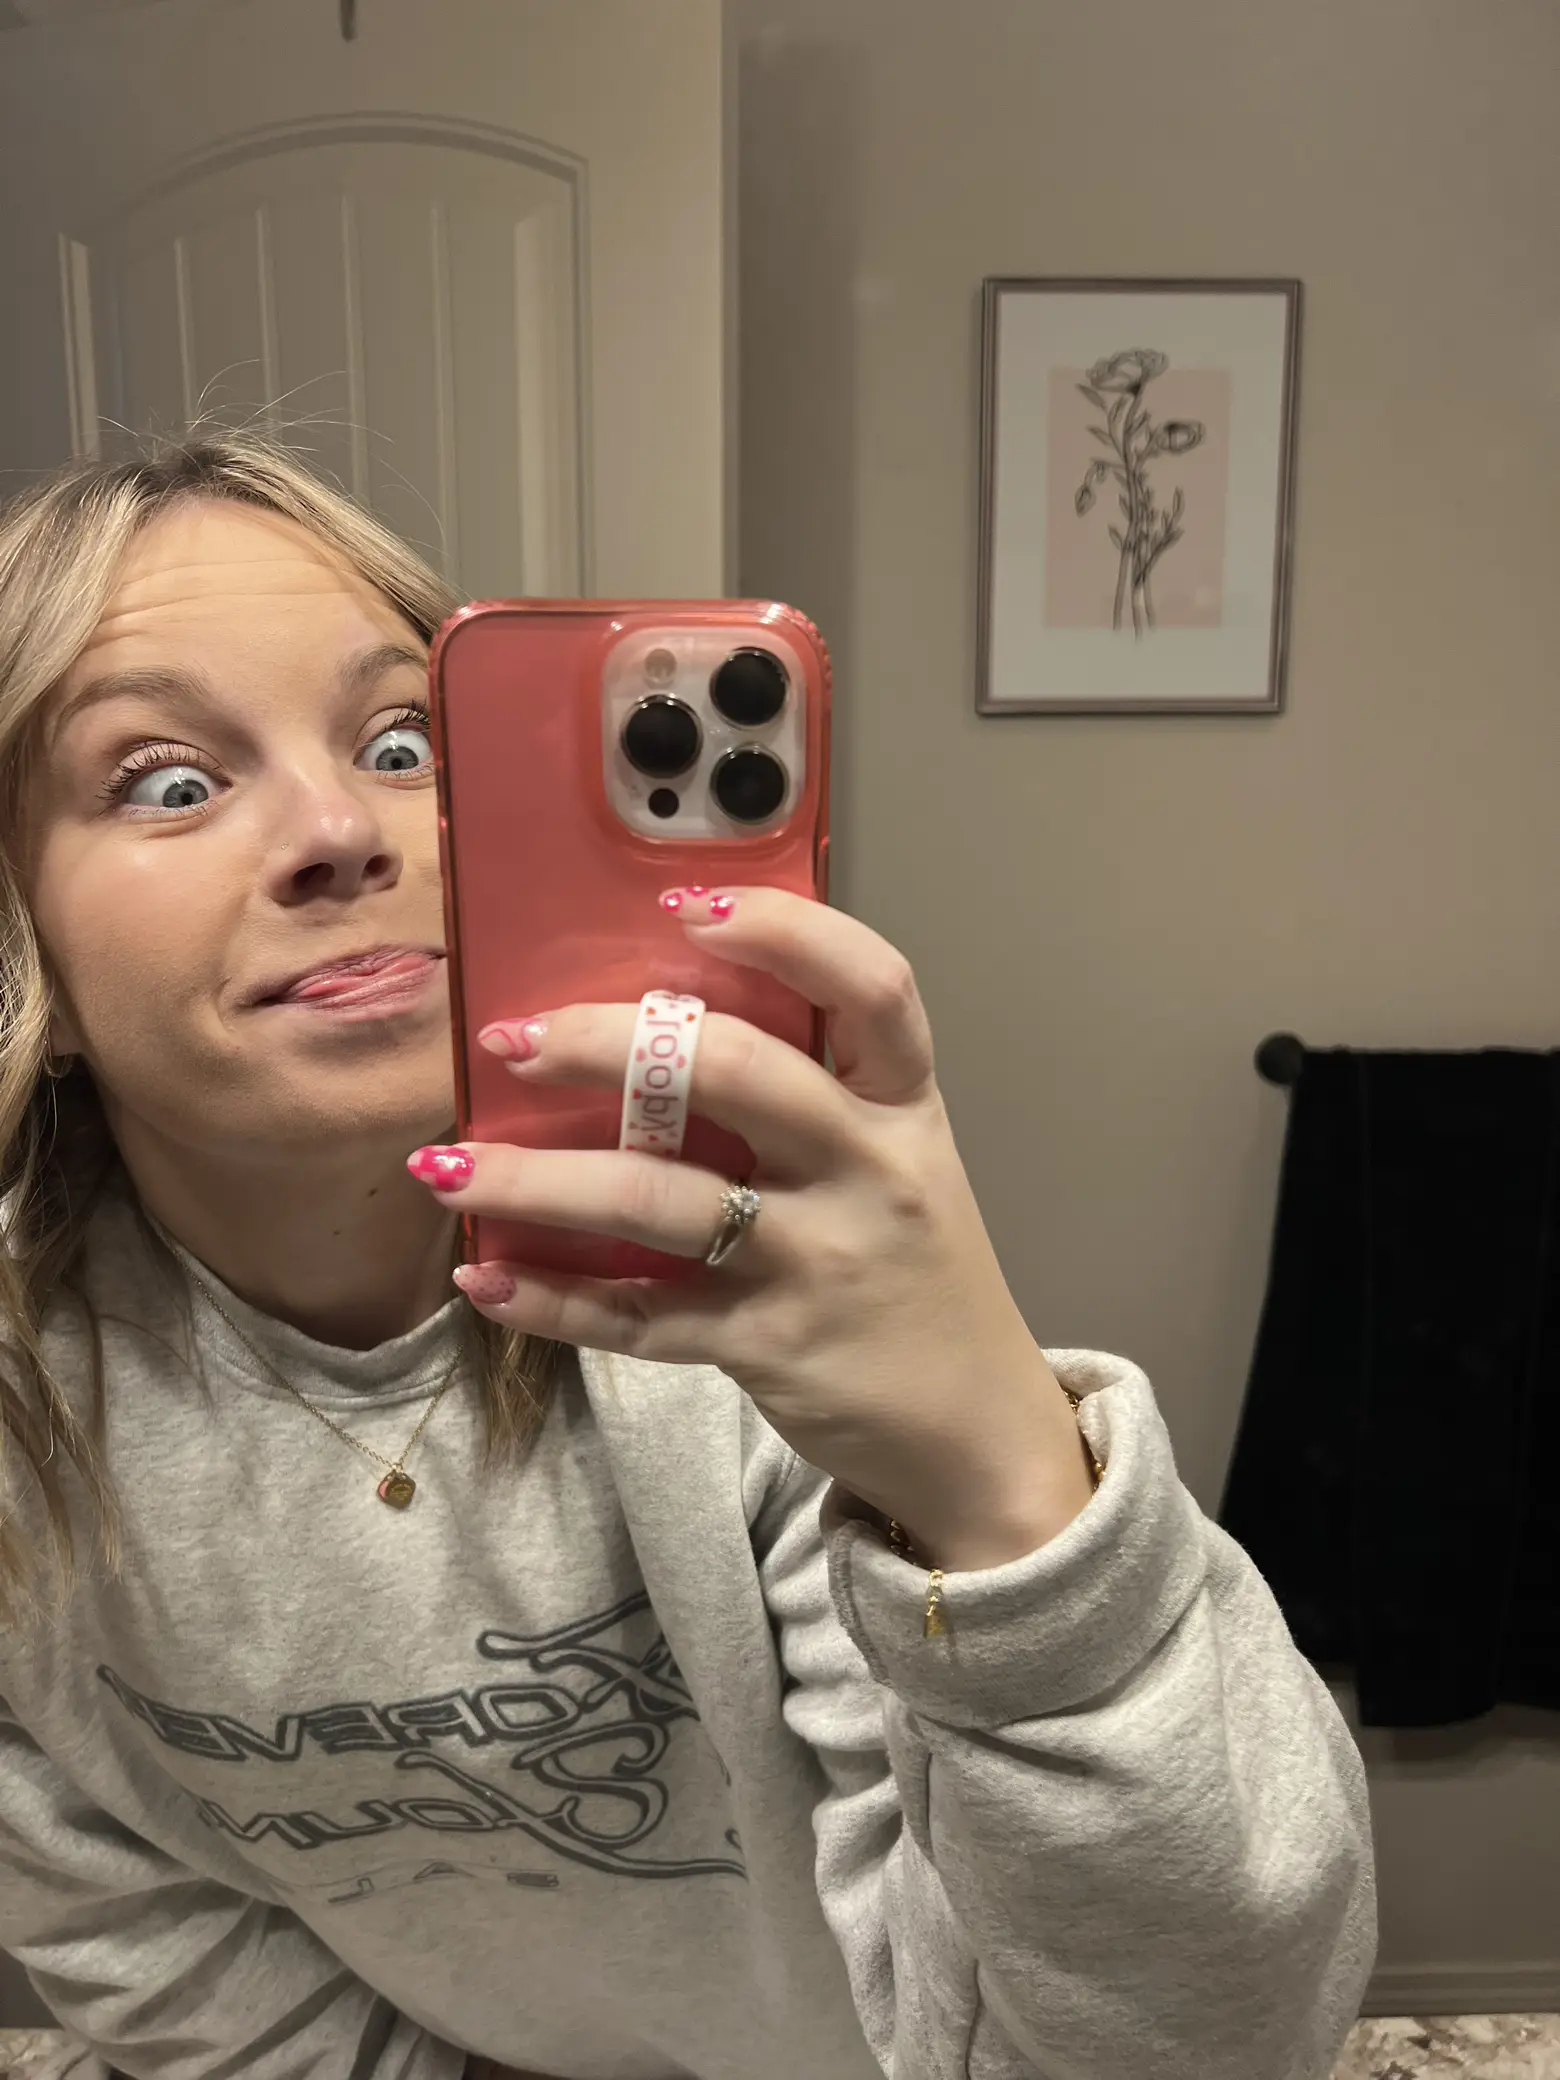 Pimp my Kindle: the cutest pop socket EVER 🌸, Video published by Courtney  Tice